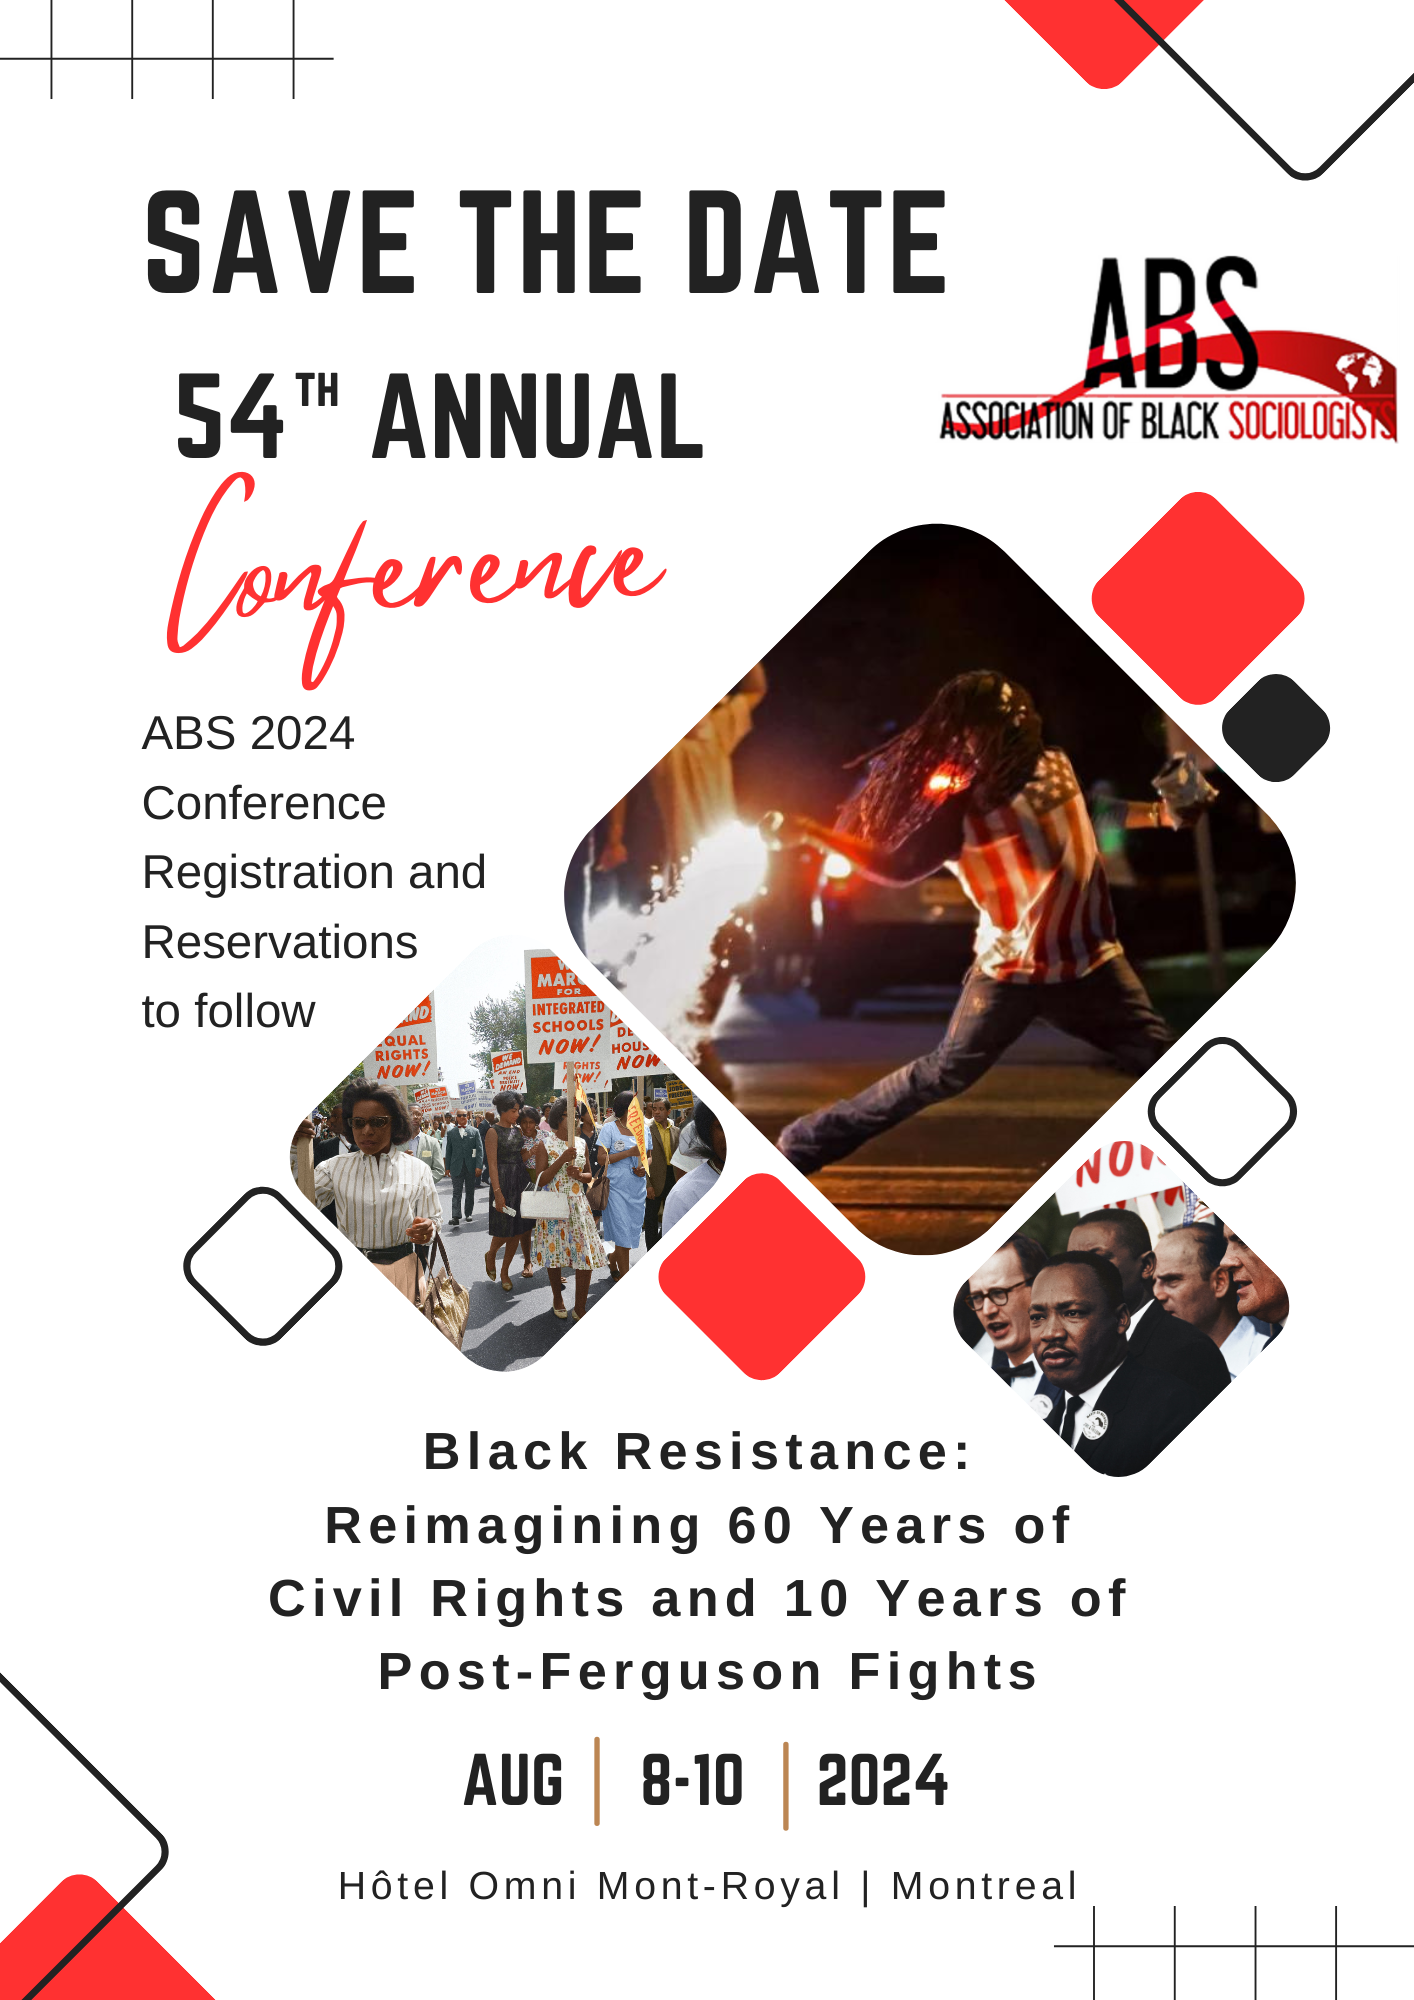 Save the date for the 54th annual ABS conference in Montreal. August 8-10, 2024.